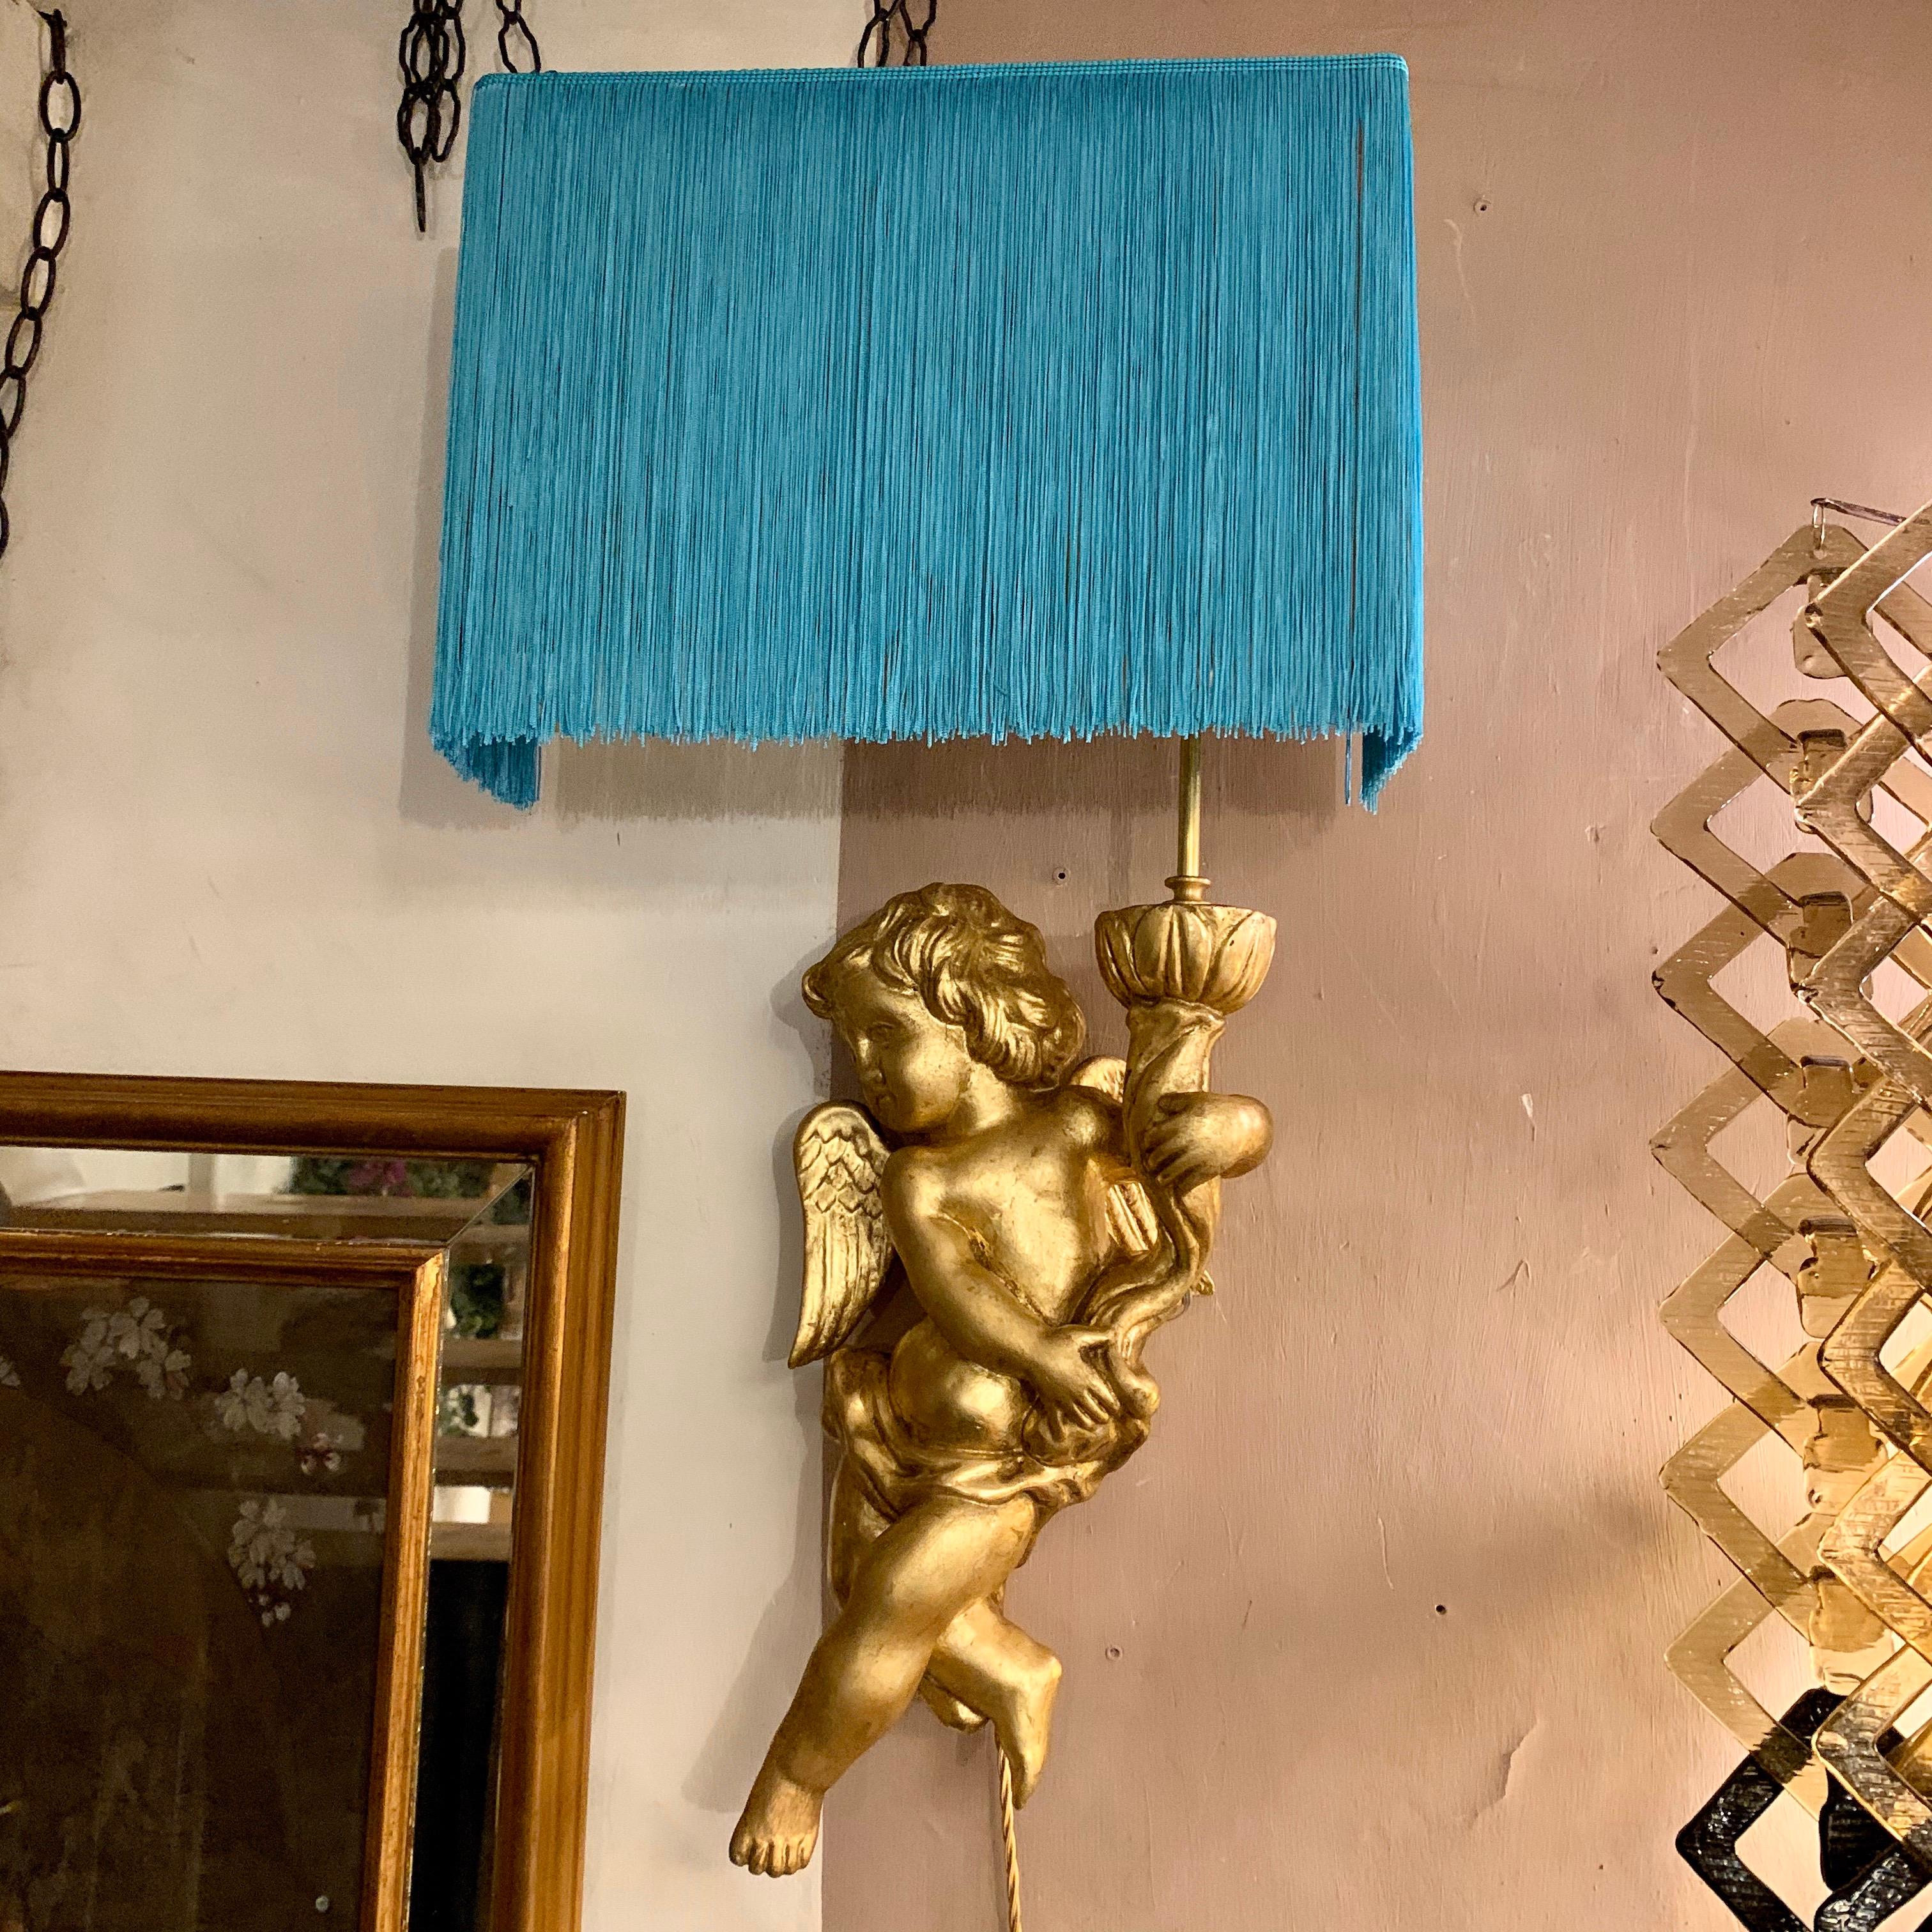 Pair of antique giltwood sculpture angel wall sconces with turquoise fringed lampshades.
The giltwood sculptures are art Florentin art wood carving, we have realized new handcrafted turquoise lampshades with fringes.
High decorative specular wall